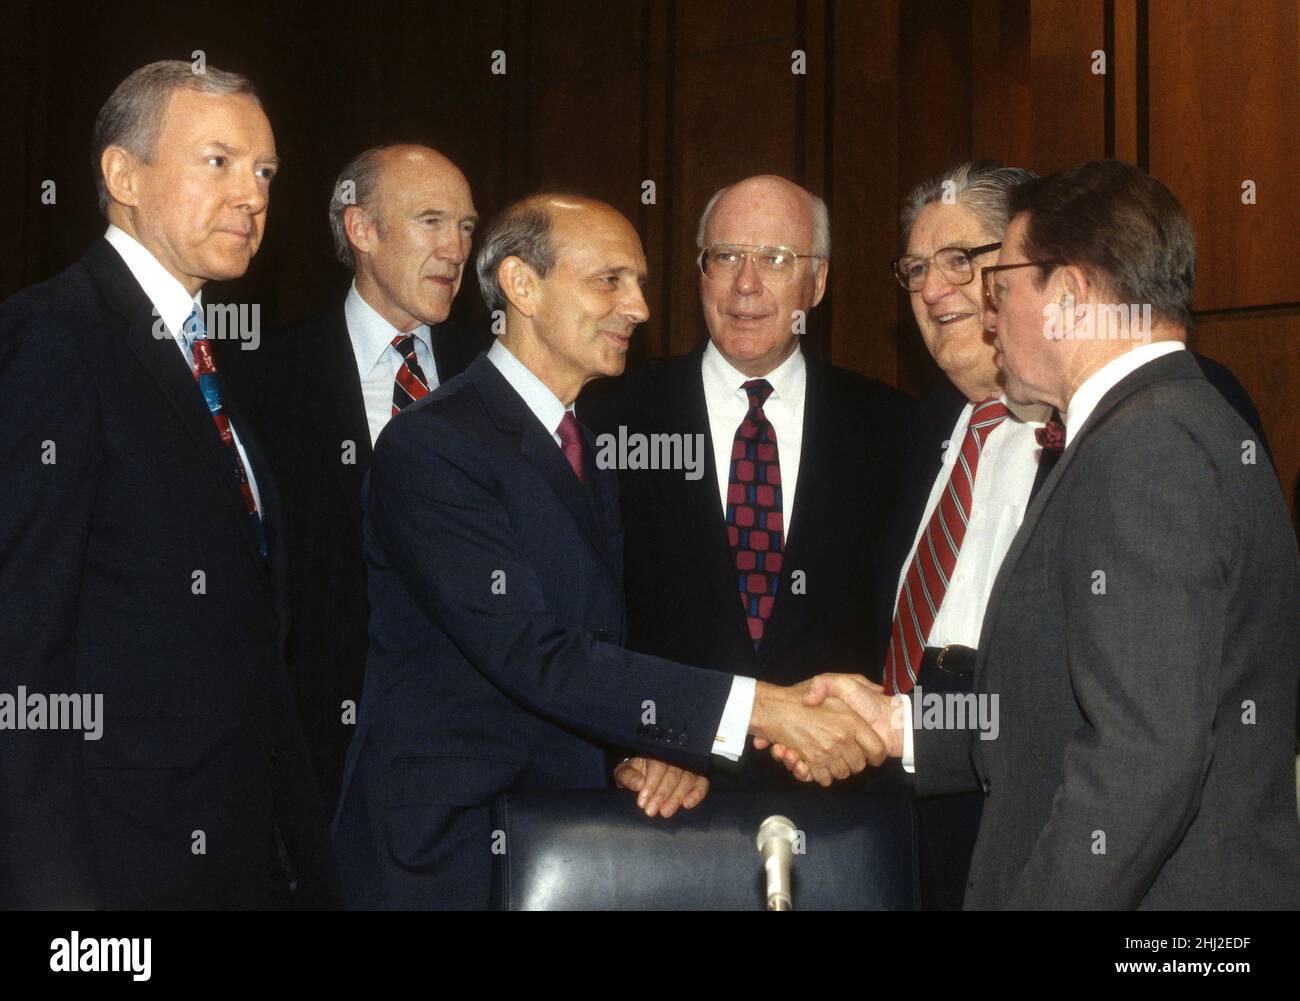 United States Senator Paul Simon (Democrat of Illinois), right, welcomes Chief Judge of the US Court of Appeals for the First Circuit, Stephen G. Breyer, US President Bill Clinton's nominee to replace the retiring Justice Harry Blackmun as Associate Justice of the US Supreme Court, third left, to his confirmation hearing on Capitol Hill in Washington, DC on July 12, 1994. From left to right; US Senator Orrin Hatch (Republican of Utah), US Senator Alan Simpson (Republican of Wyoming), Judge Breyer, United States Senator Patrick Leahy (Democrat of Vermont), US Senator Howell Heflin (Democrat of Stock Photo